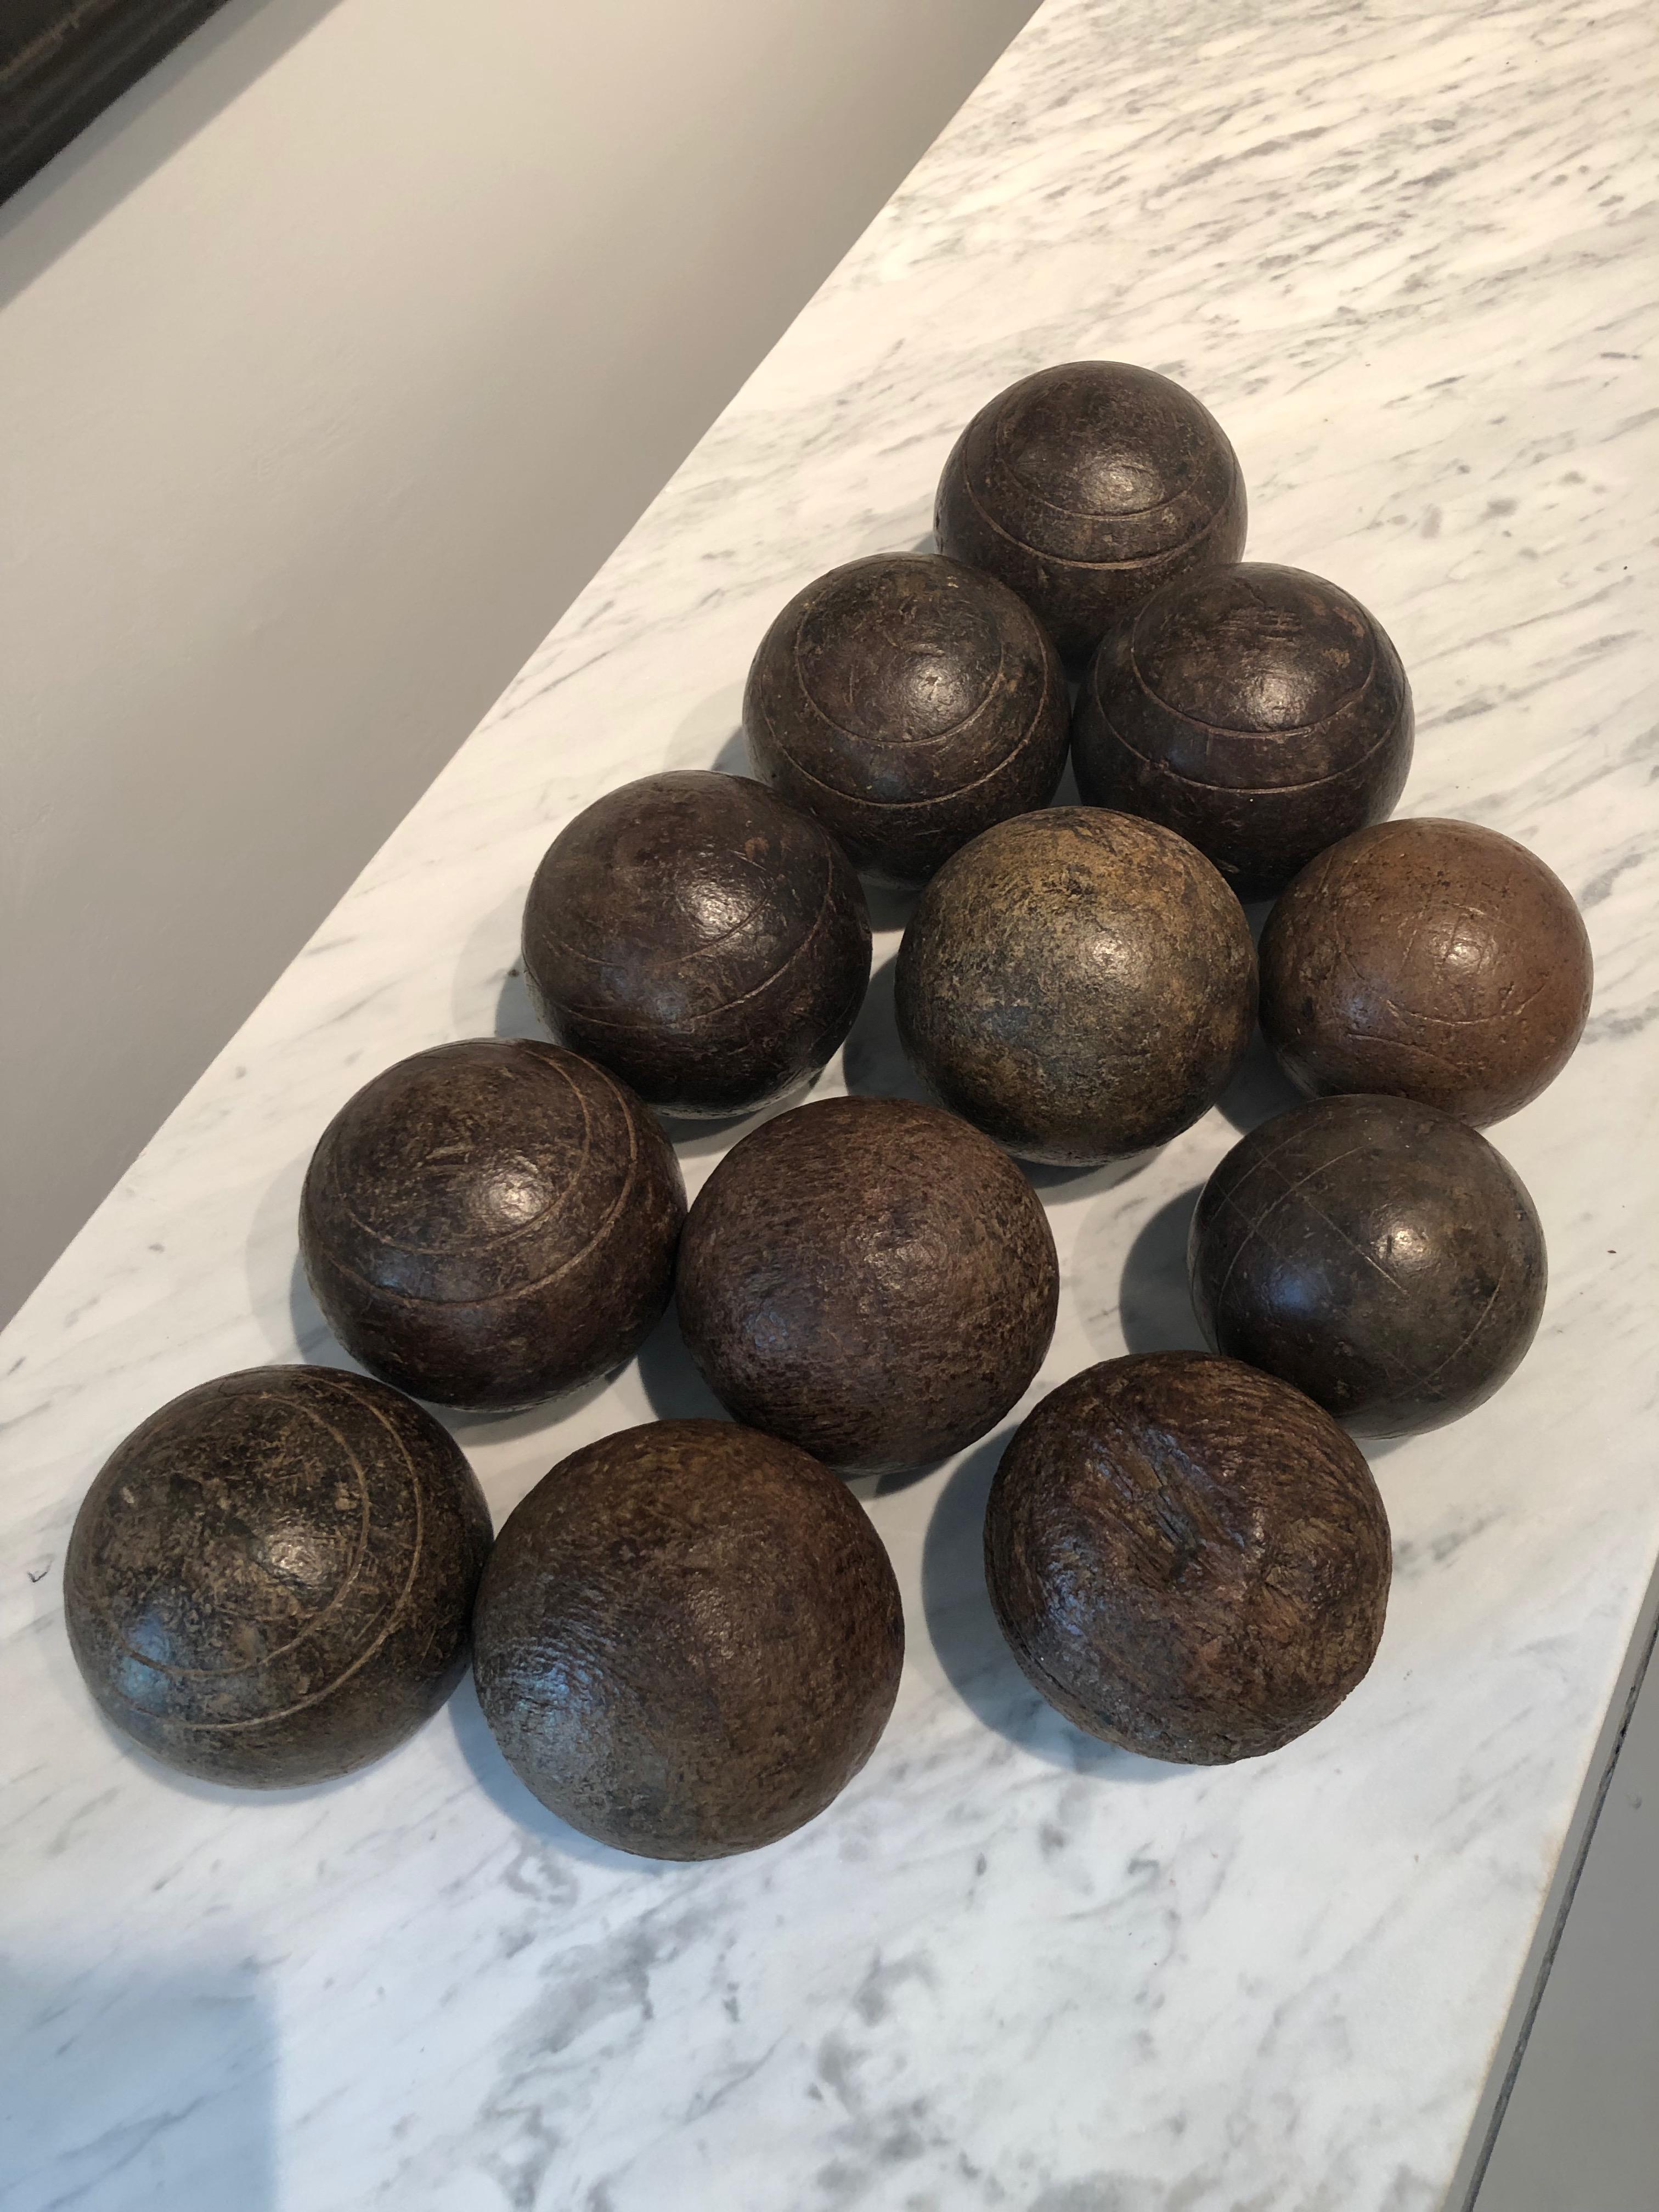 Boules are used to play Pétanque, the French equivalent of Boccé and this set is beautiful. Made from walnut and dating to the 1870s, the set comprises two different sizes, ten larger and two smaller boules some incised with circular detailing and